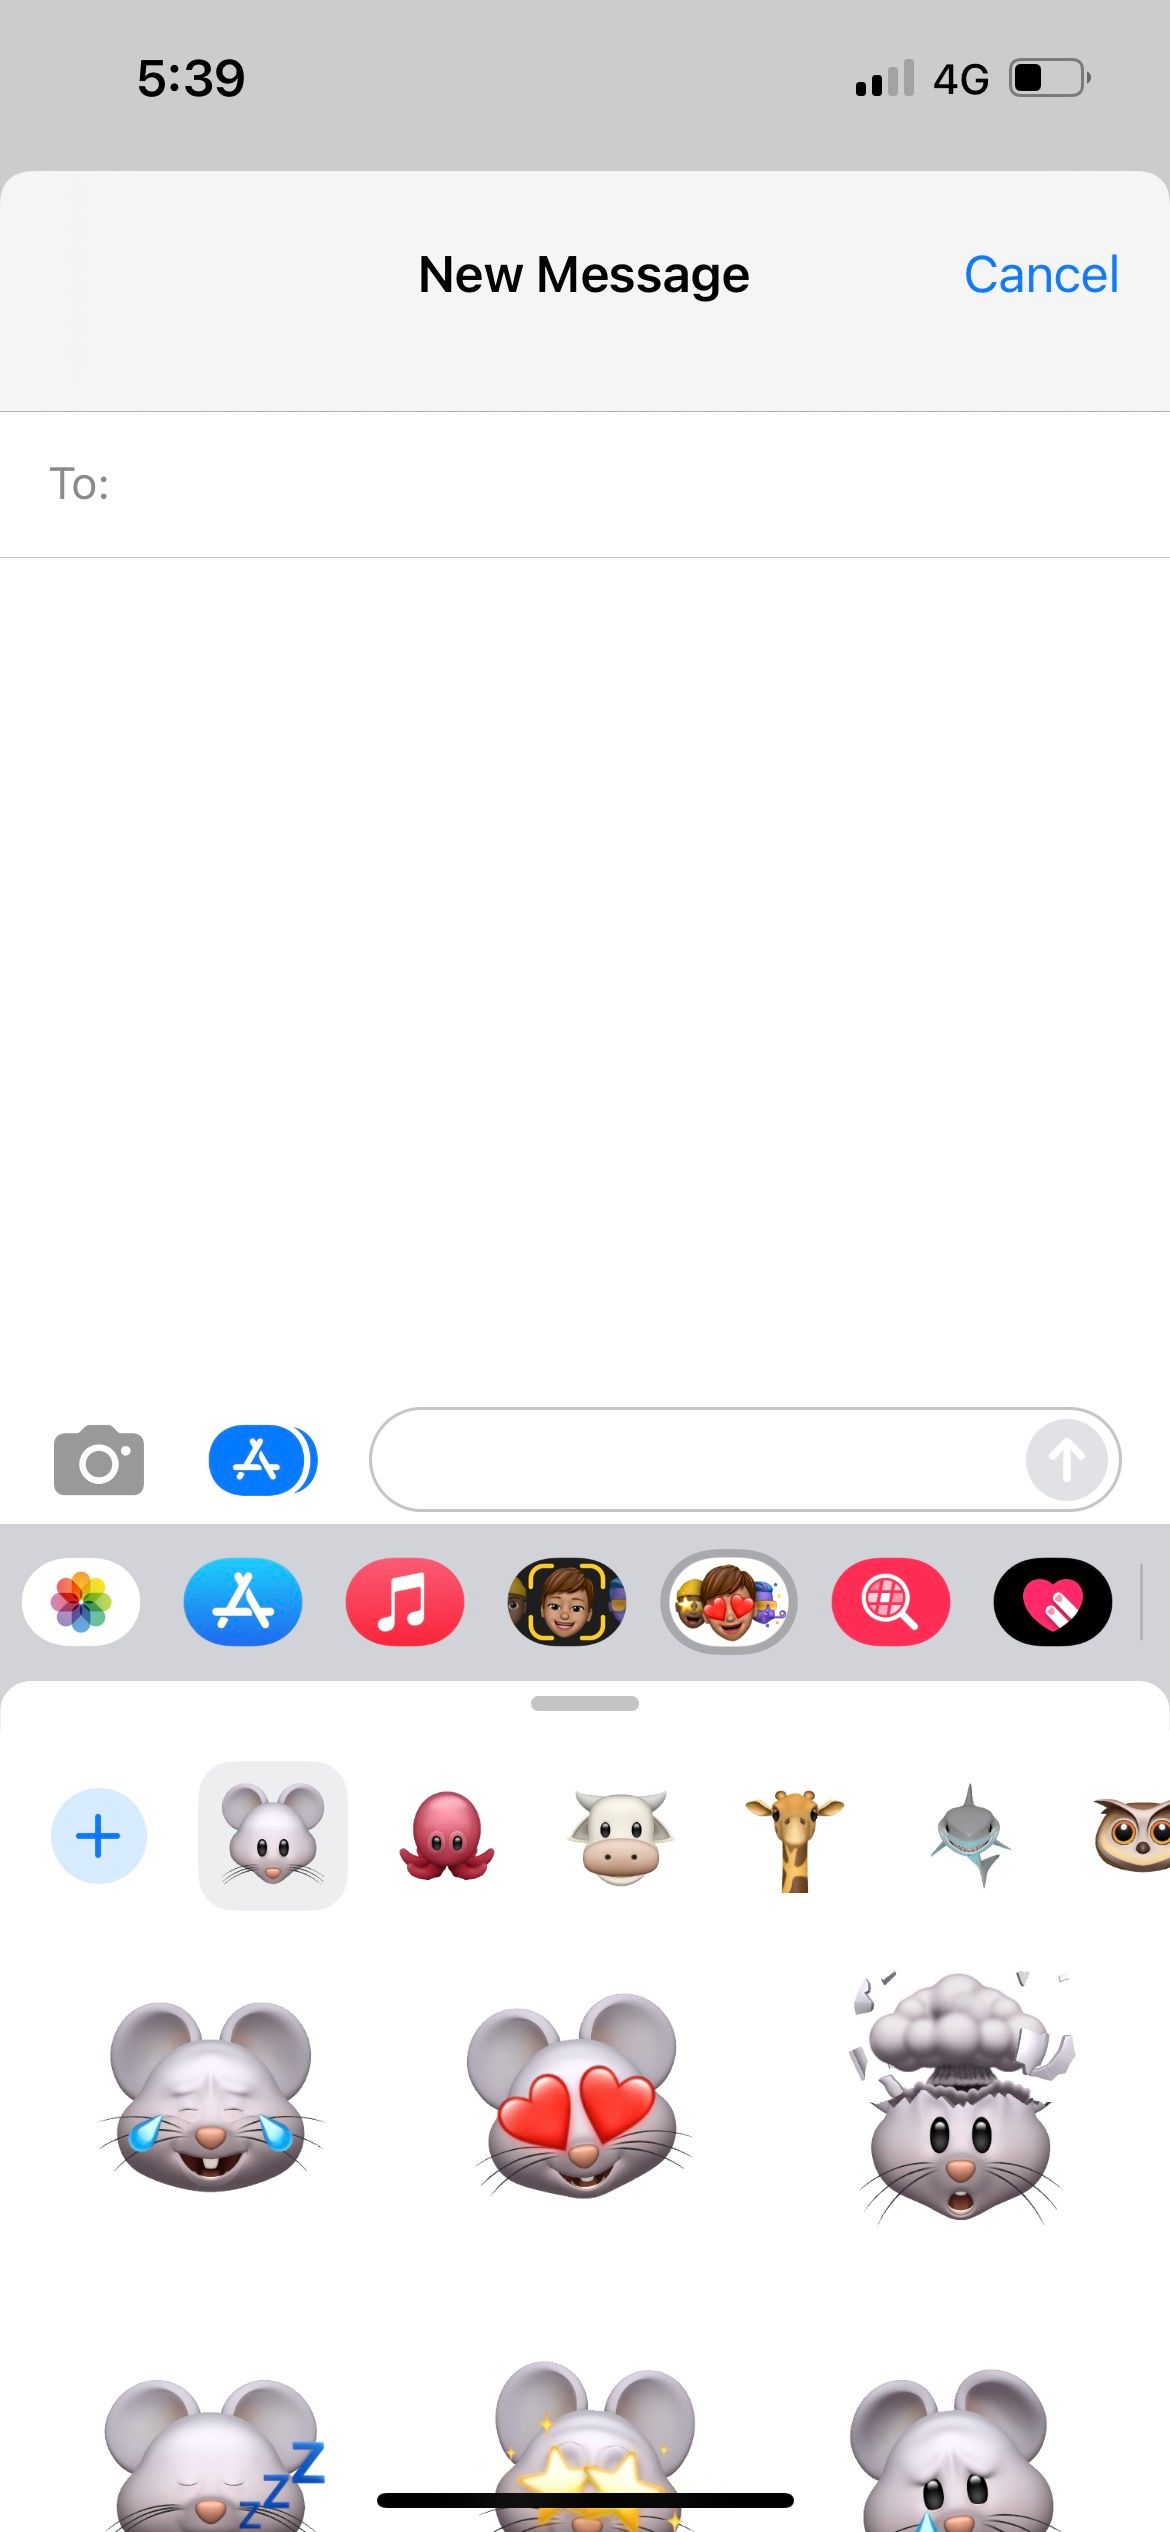 mouse animoji sticker pack in iphone messages app